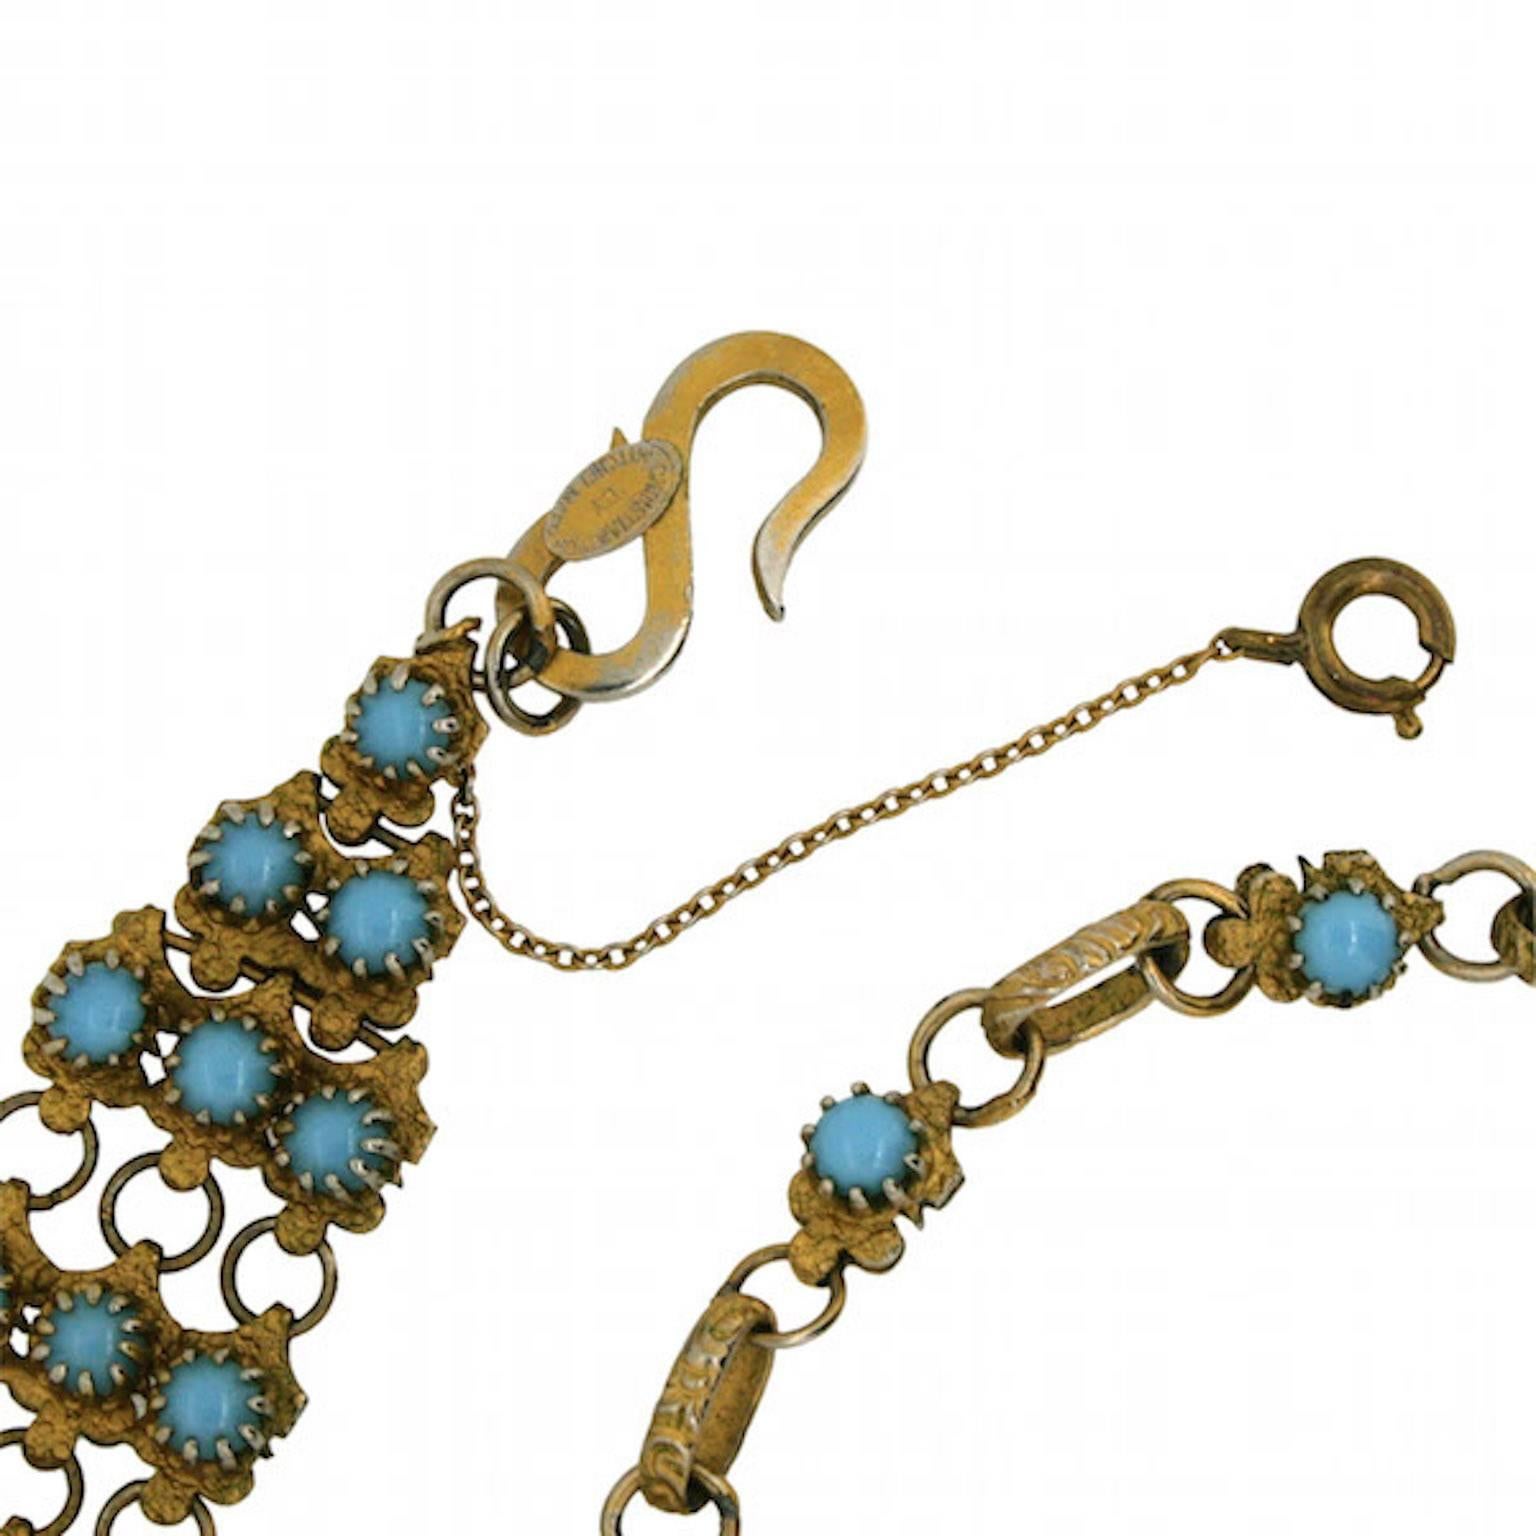 Christian Dior by Mitchel Maer 1950s Faux Turquoise Vintage Necklace In Good Condition For Sale In Wigan, GB